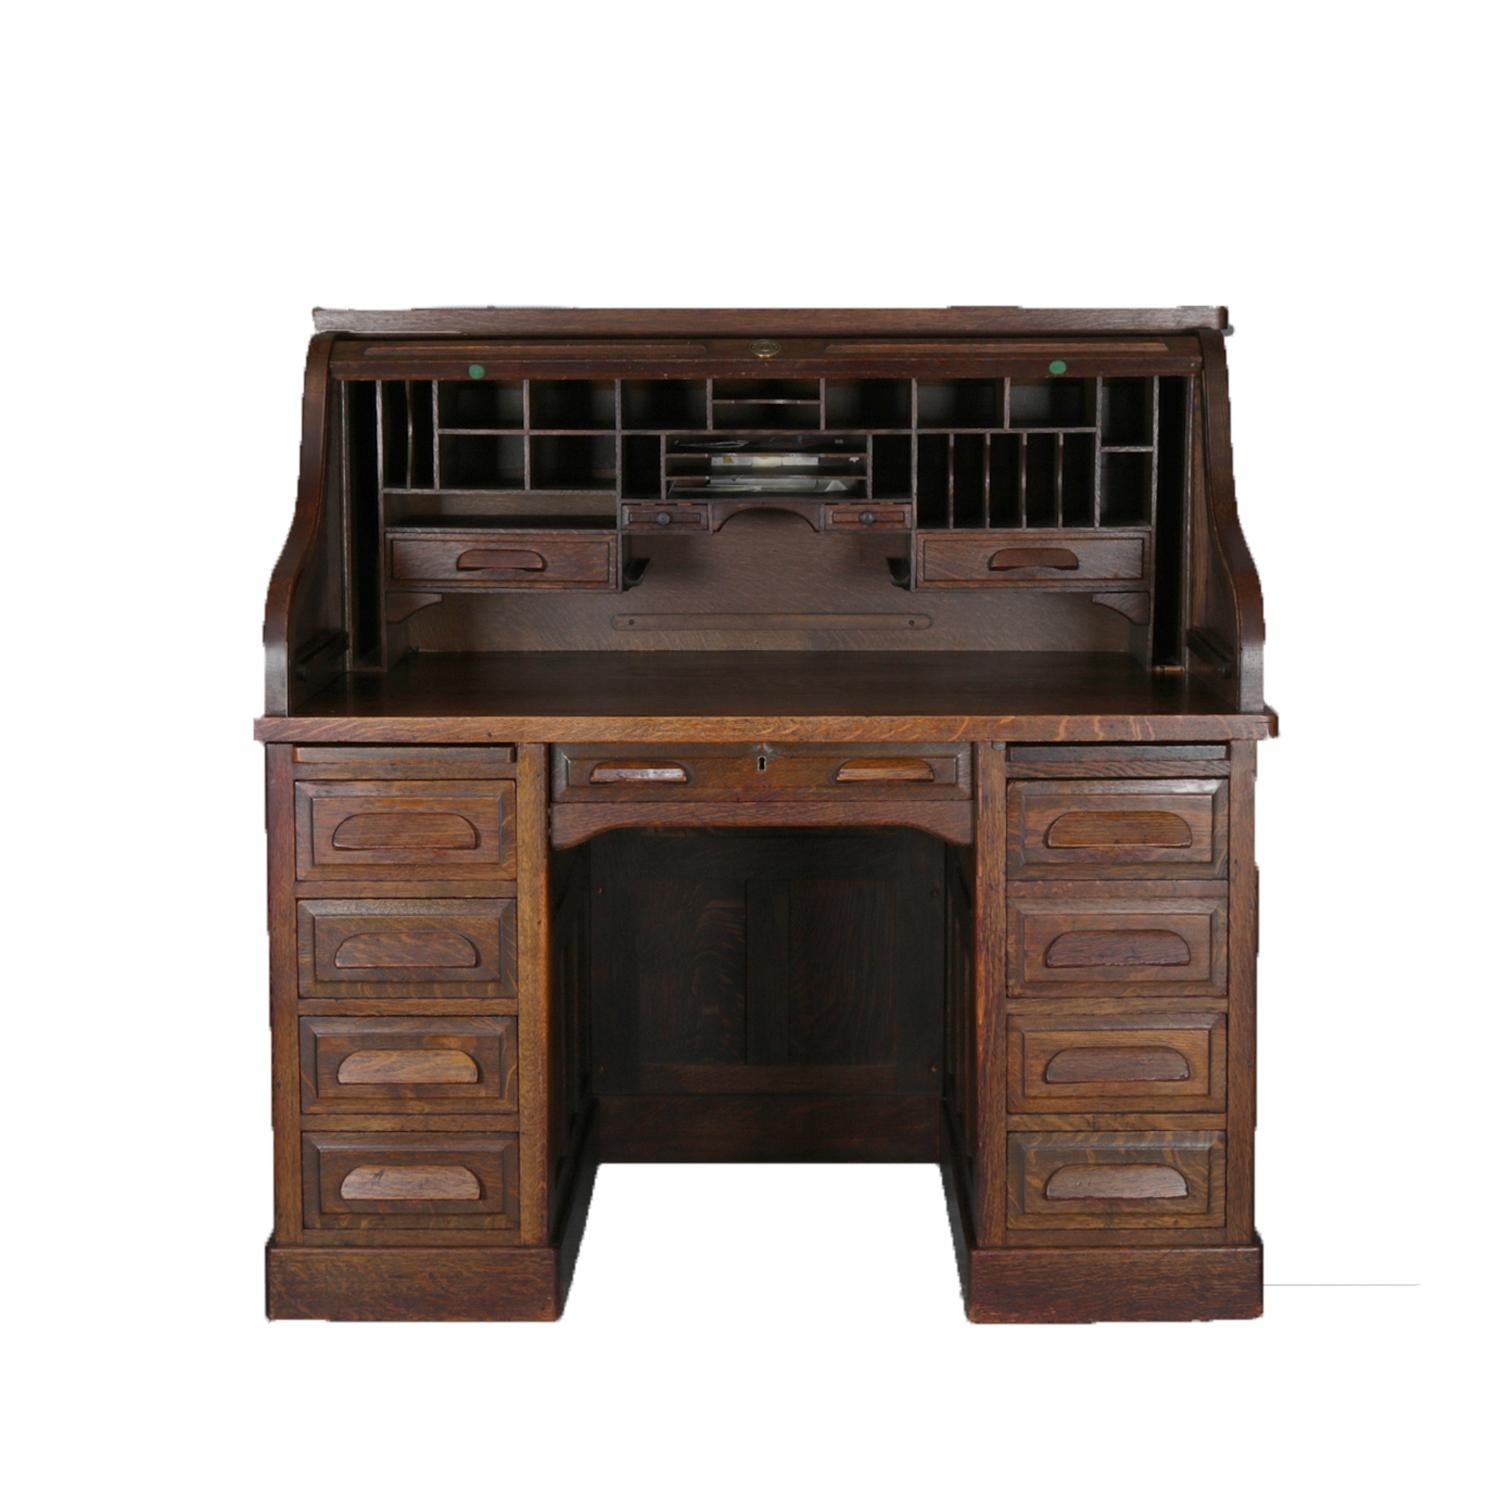 An antique Derby style roll top desk by Standard features roll top opening to reveal writing surface surmounted by pigeon holes and storage drawers over paneled cabinet with drawers and pull outs working surfaces, circa 1900

Measures: 50